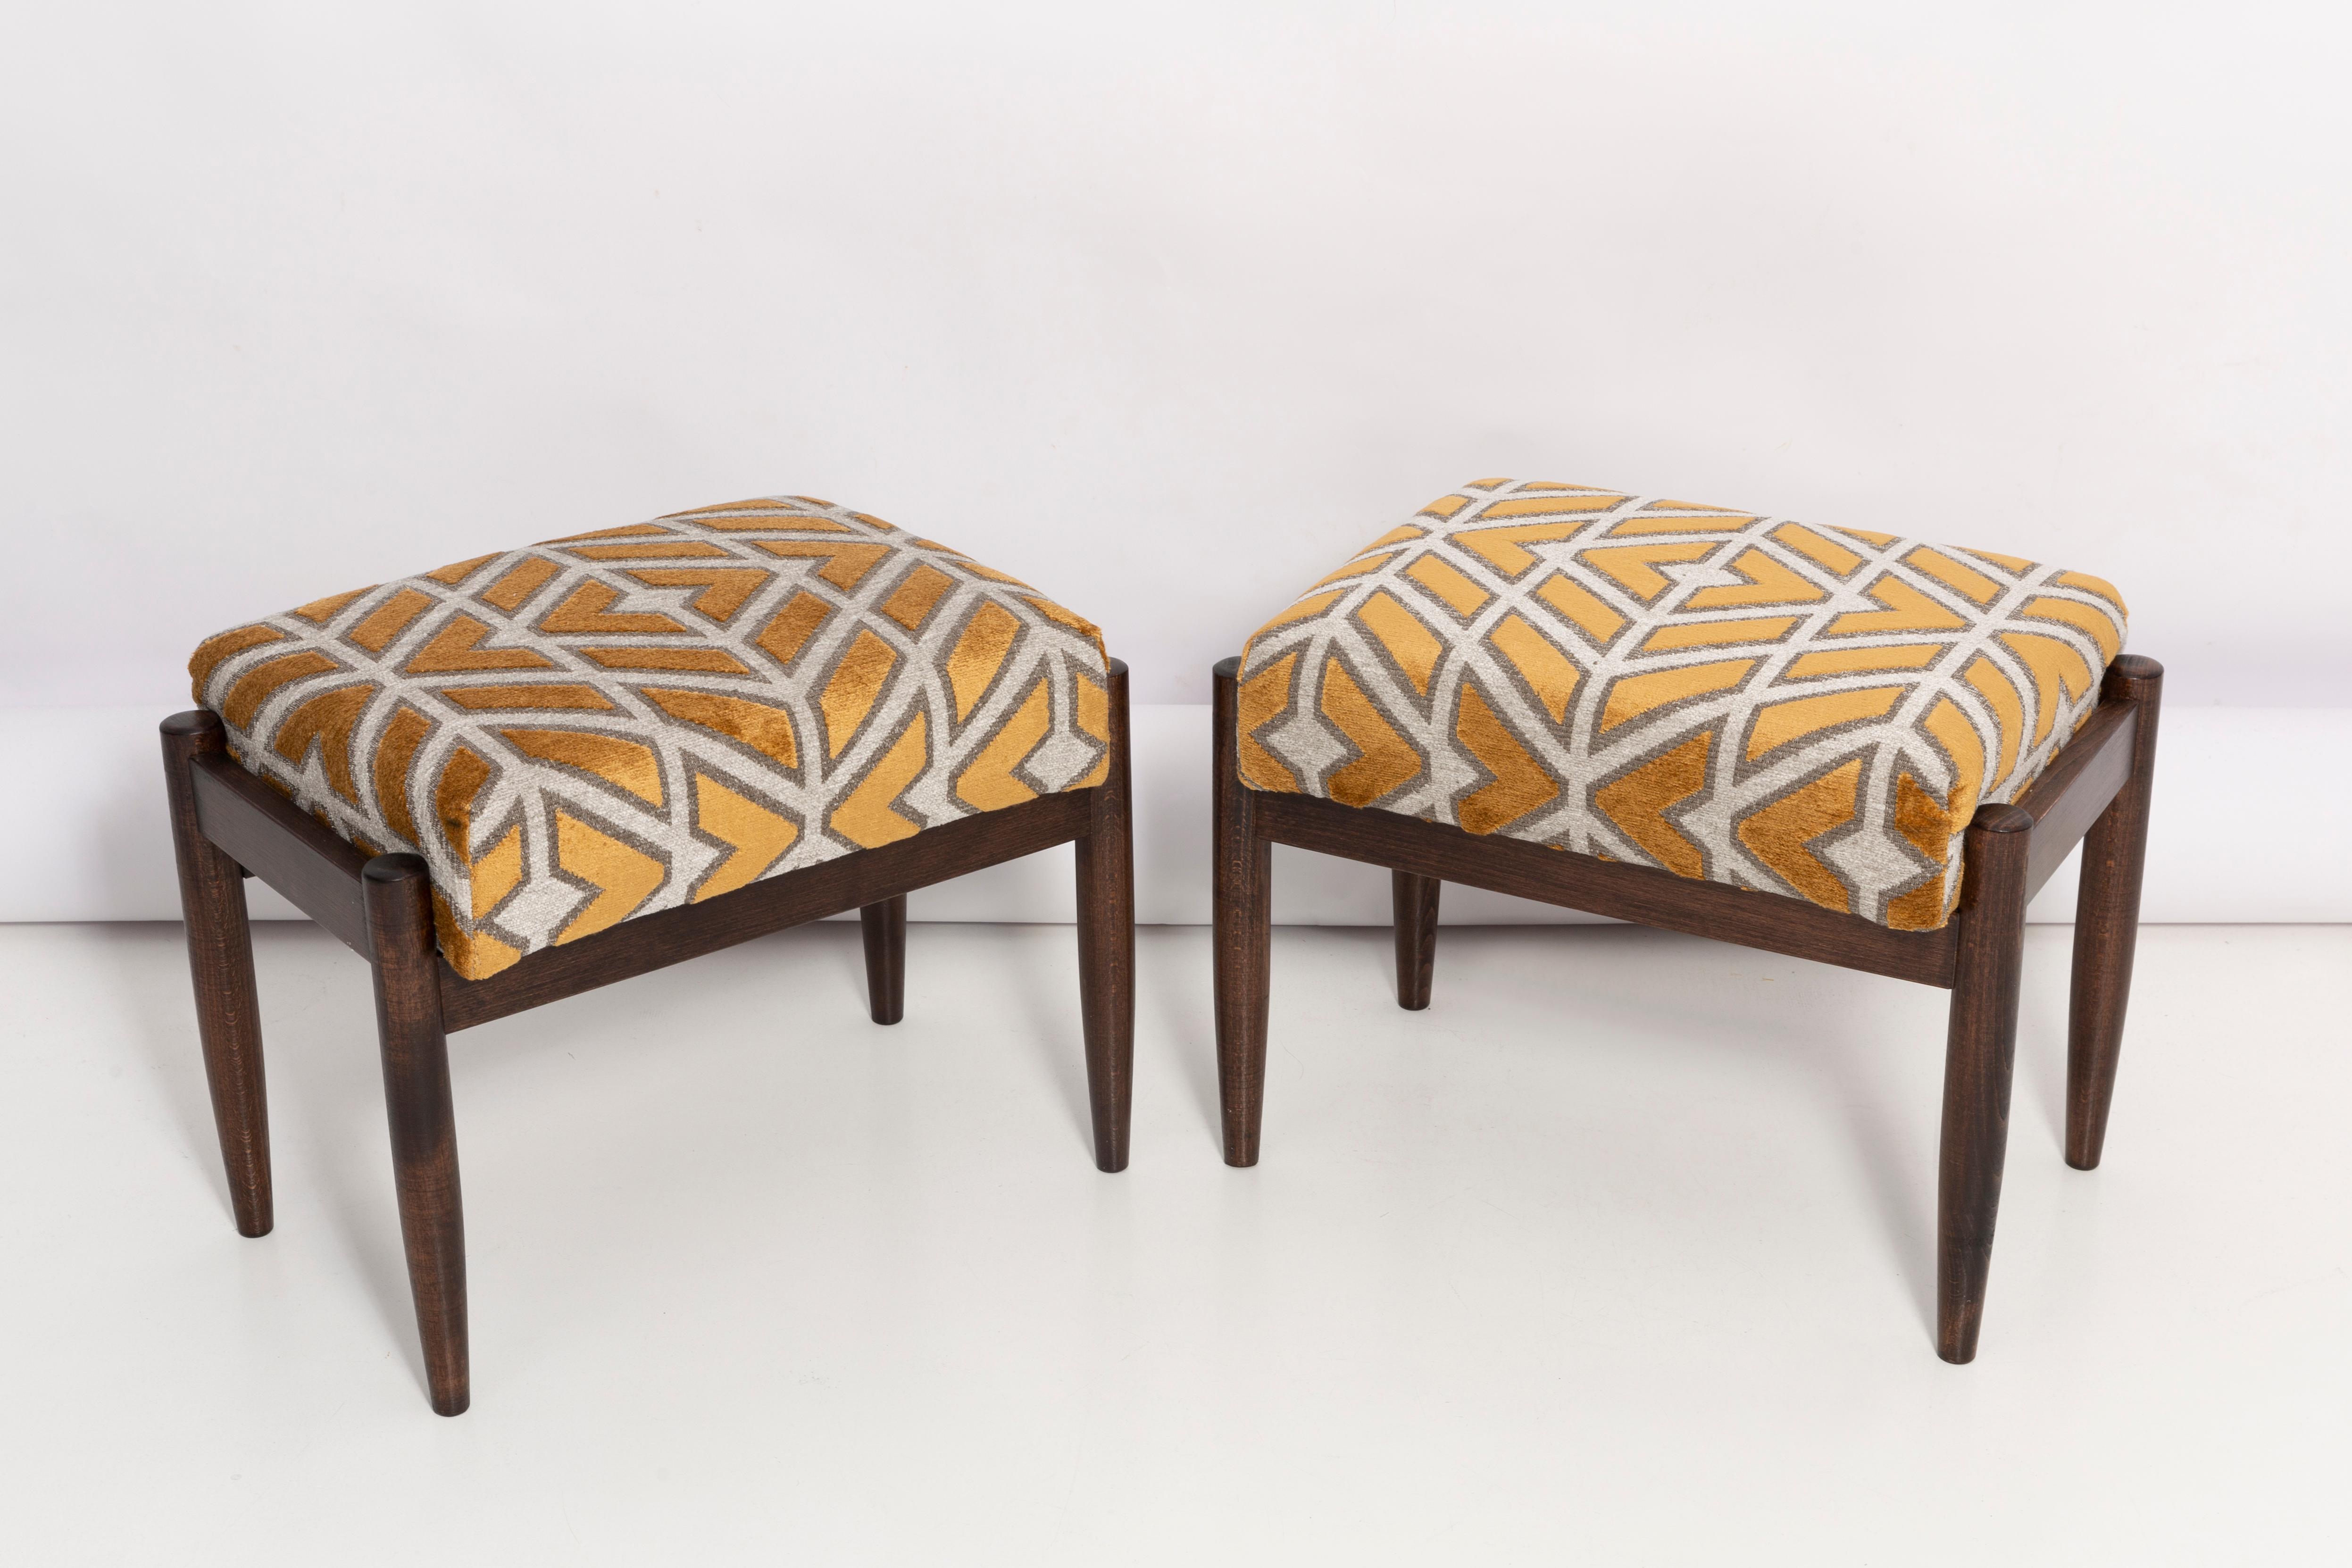 Stools from the turn of the 1960s. Beautiful yellow pattern high quality spanish gull lamadrid velvet upholstery. The stools consists of an upholstered part, a seat and wooden legs narrowing downwards, characteristic of the 1960s style. We can